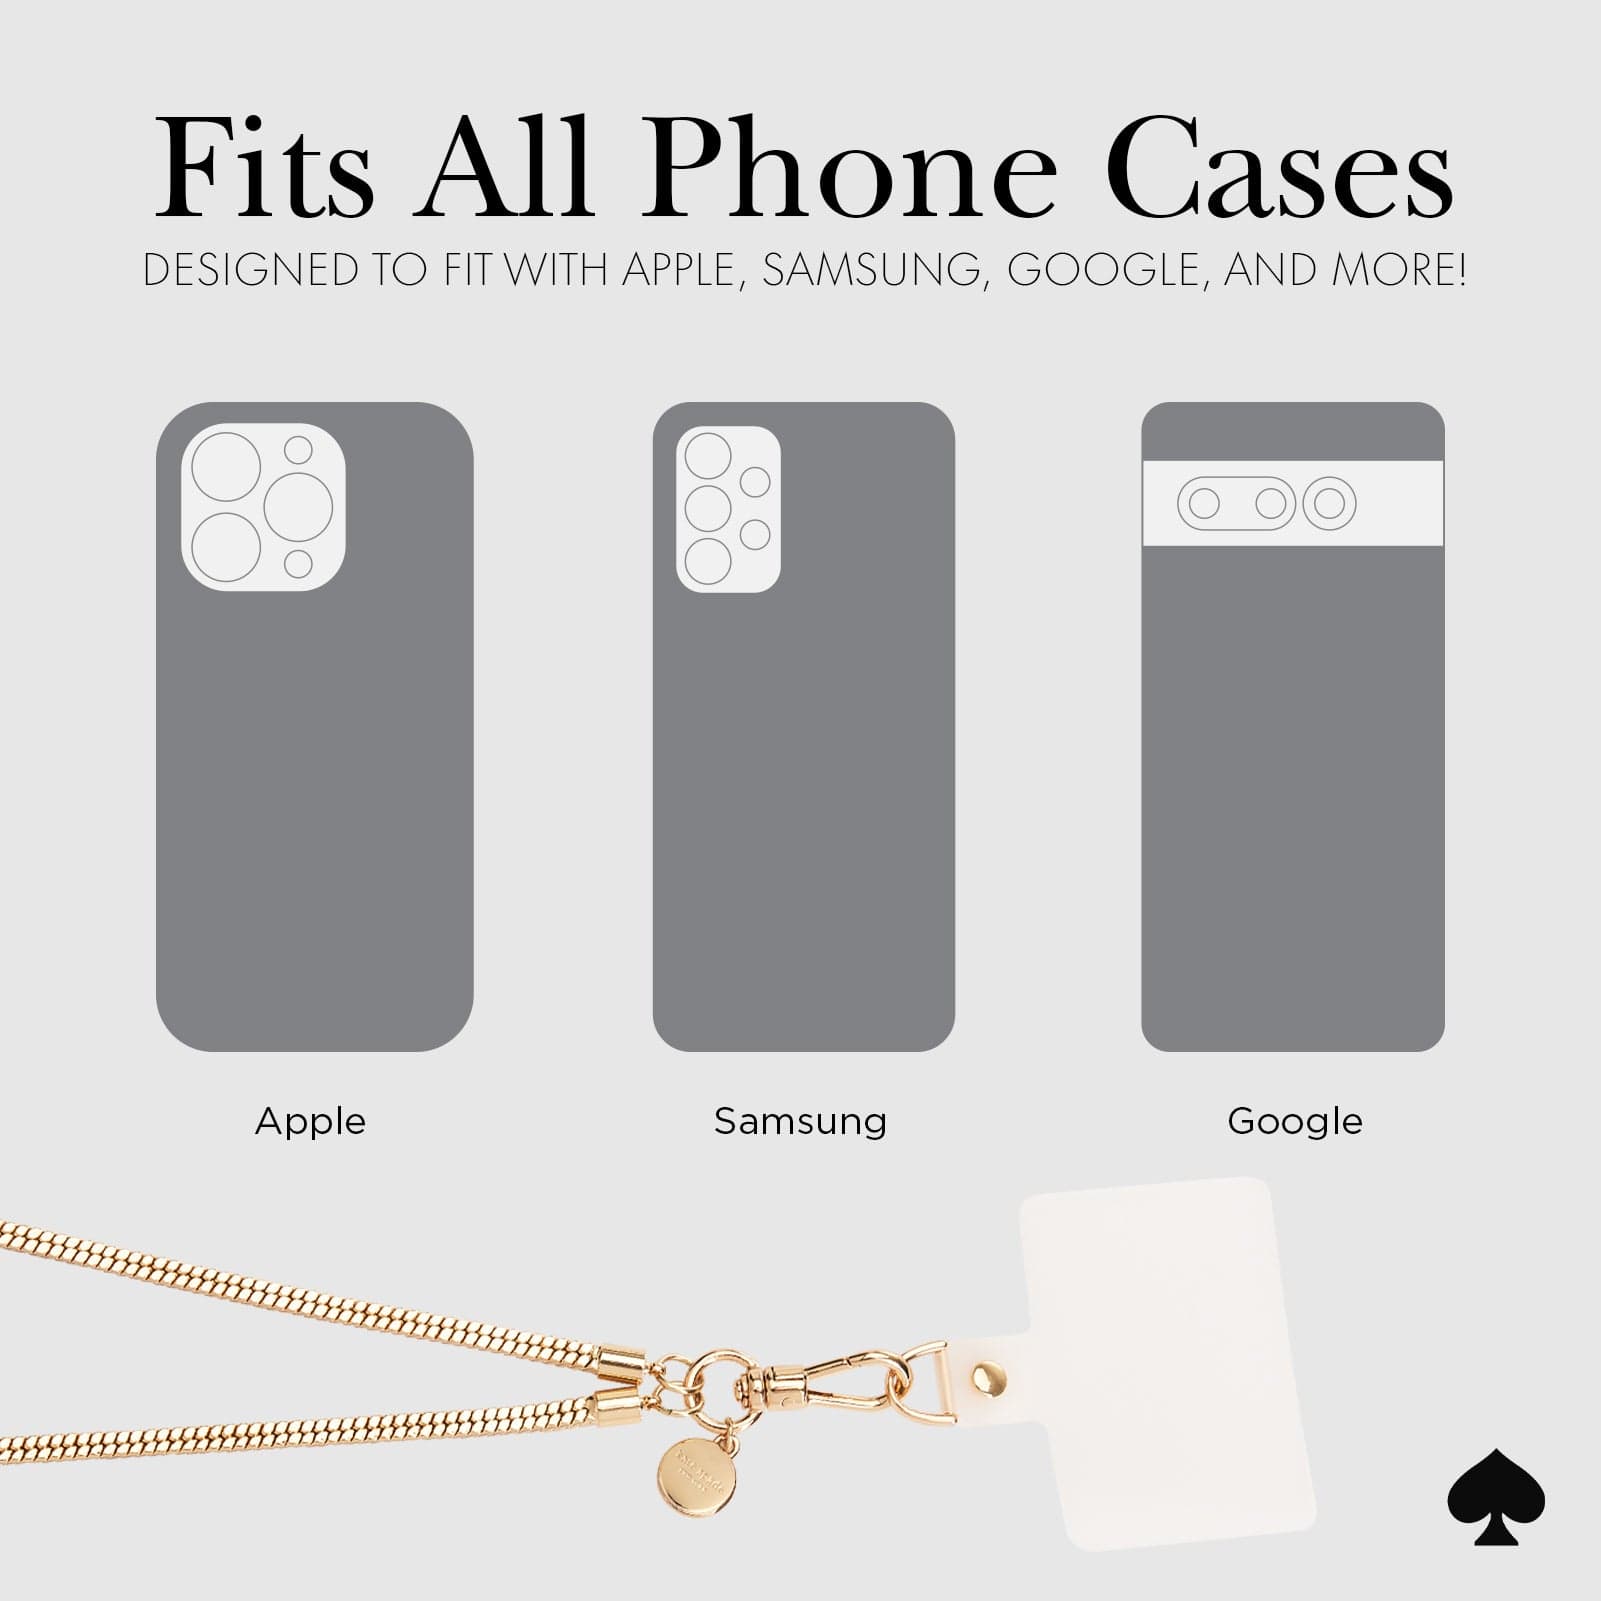 FITS ALL PHONE CASES. DESIGNED TO FIT WITH APPLE, SAMSUNG, GOOGLE AND MORE!